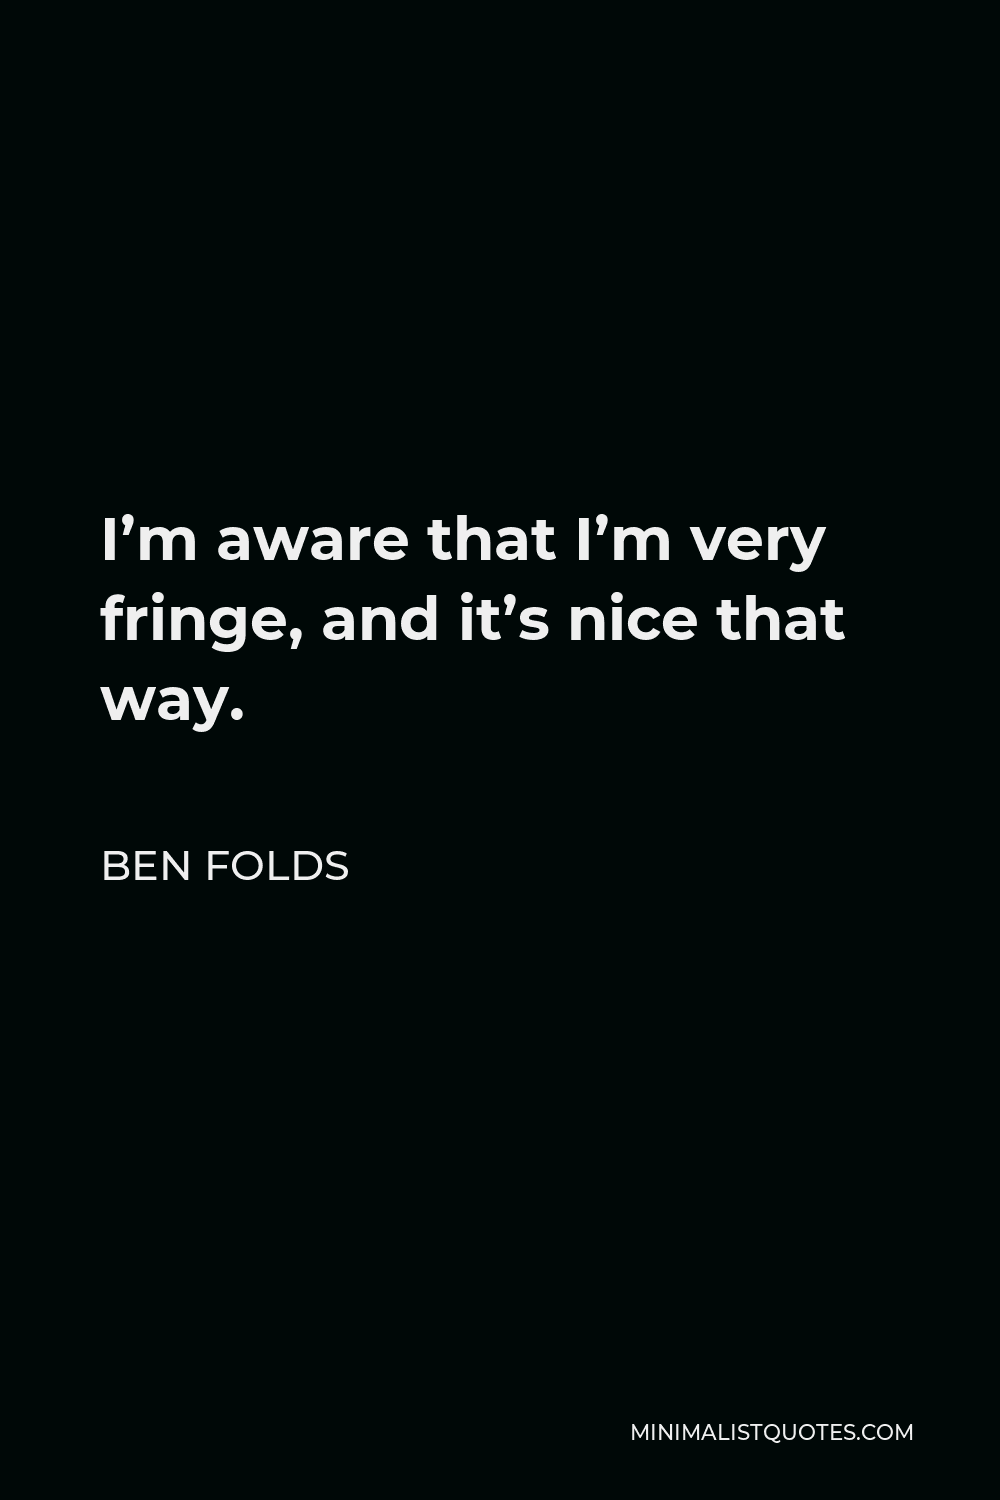 Ben Folds Quote - I’m aware that I’m very fringe, and it’s nice that way.